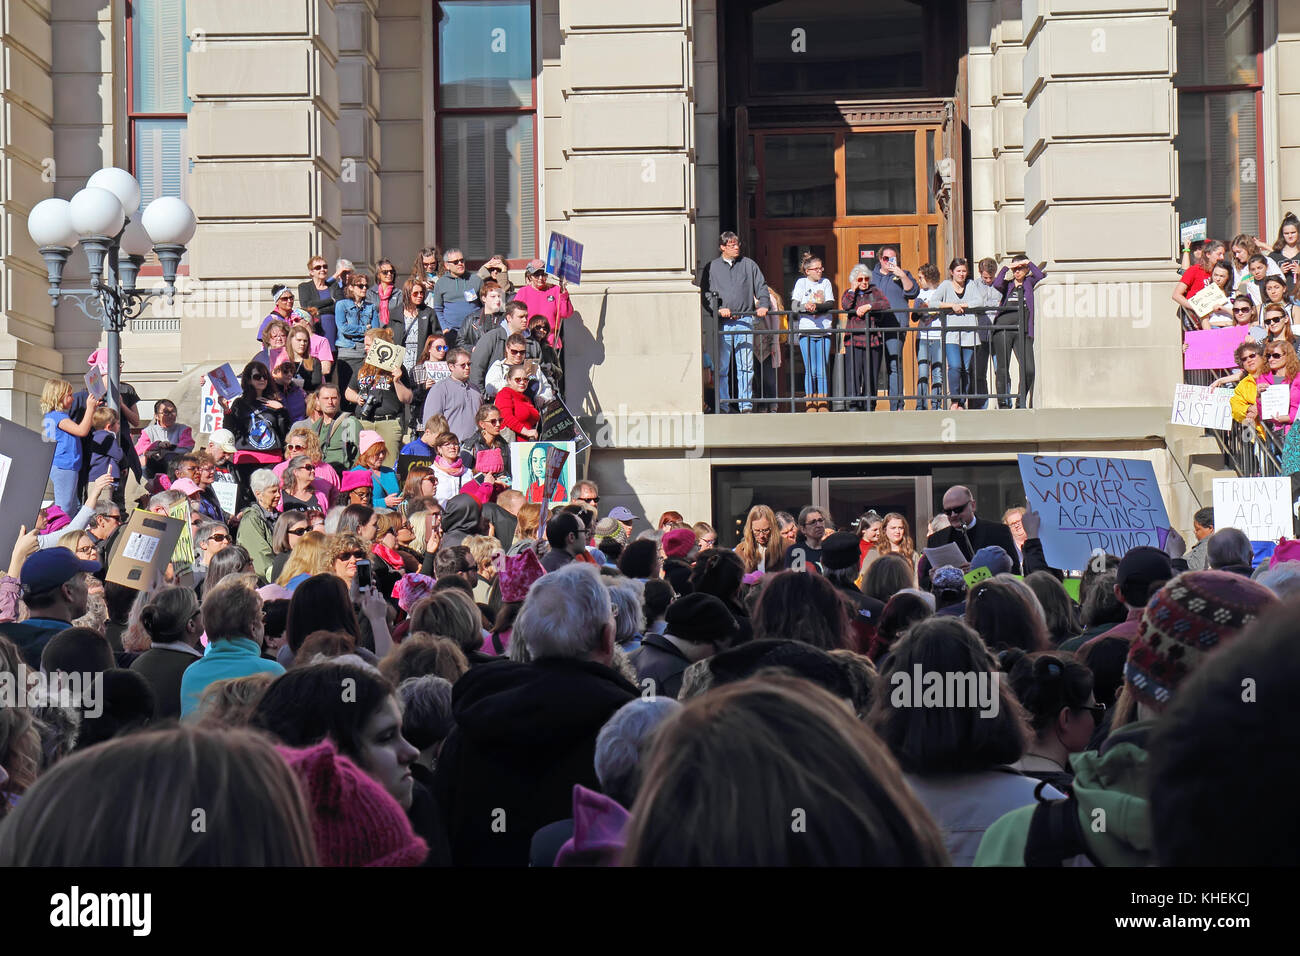 LAFAYETTE, INDIANA - JANUARY 21 2017: Peaceful protesters at the anti-Trump WomenÕs March on the steps of the Tippecanoe County Courthouse. Approximat Stock Photo